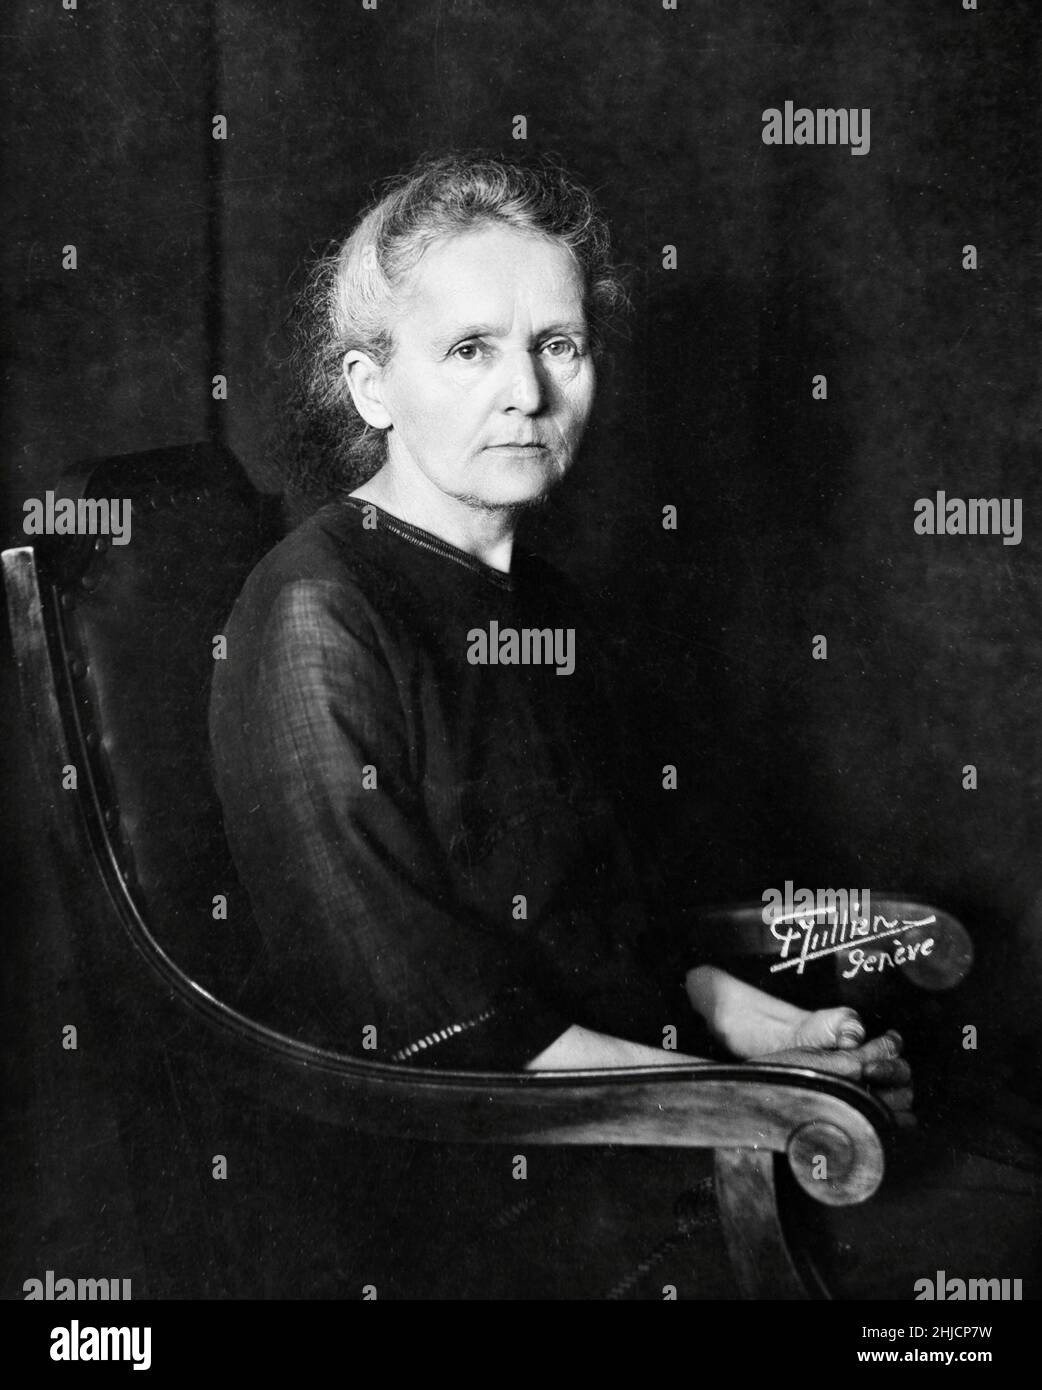 Marie Curie (1867-1934) was a Polish-French physicist and chemist and multiple Nobel laureate. Her achievements included a theory of radioactivity (a term that she coined), techniques for isolating radioactive isotopes, and the discovery of two elements, polonium and radium. Photographed by Frank Henri Jullien, 1922. Stock Photo